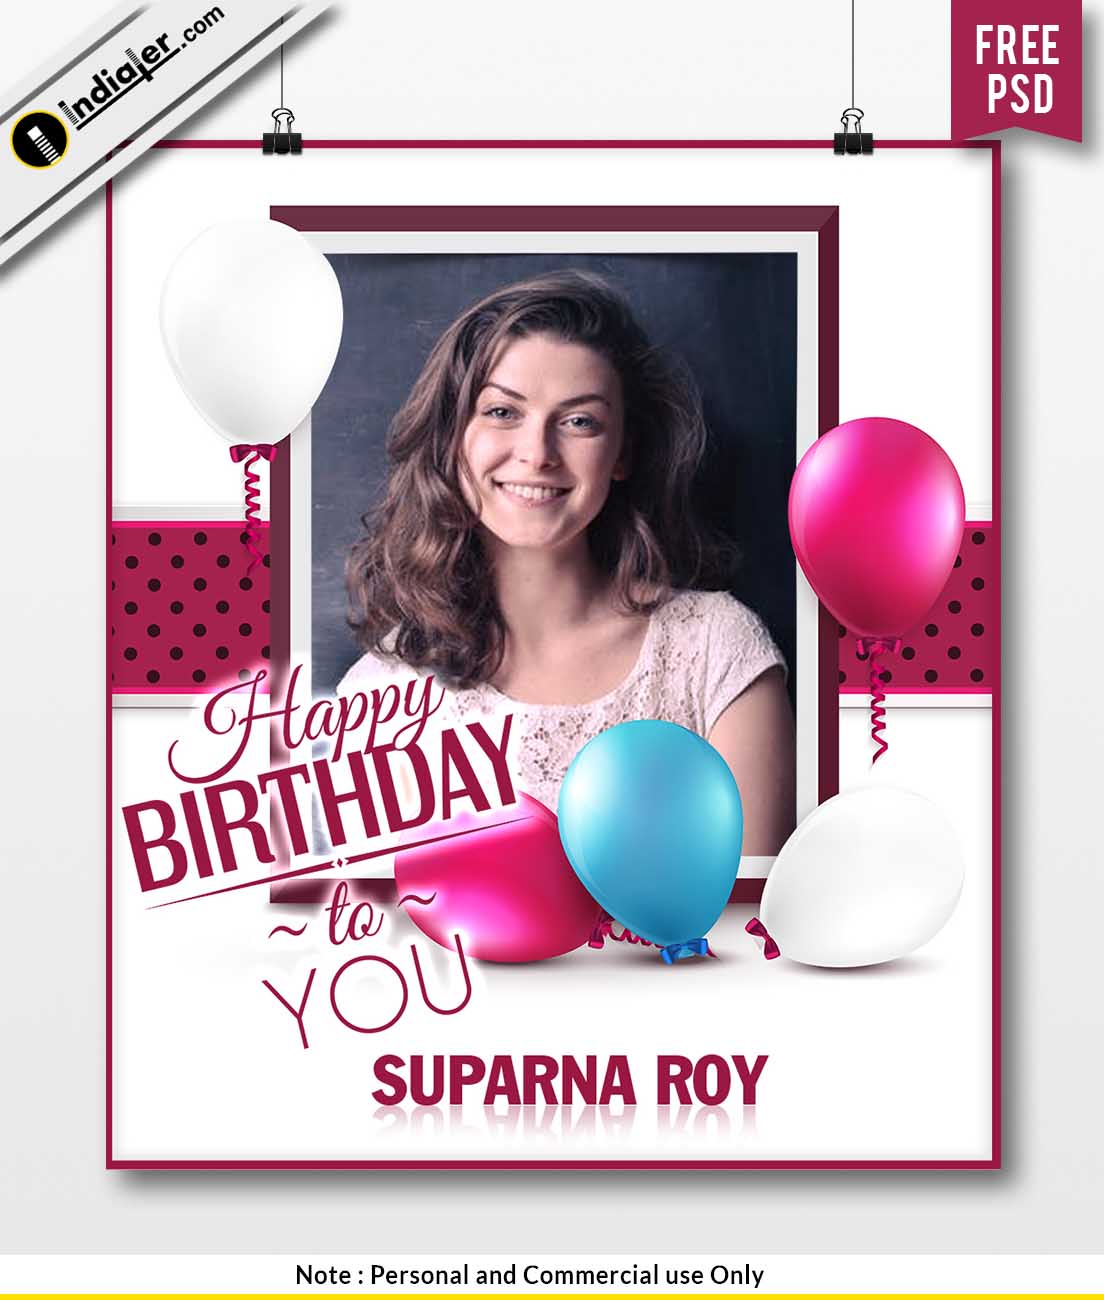 Free Birthday Wishes Photo Frame and Balloon PSD template - Indiater Pertaining To Photoshop Birthday Card Template Free